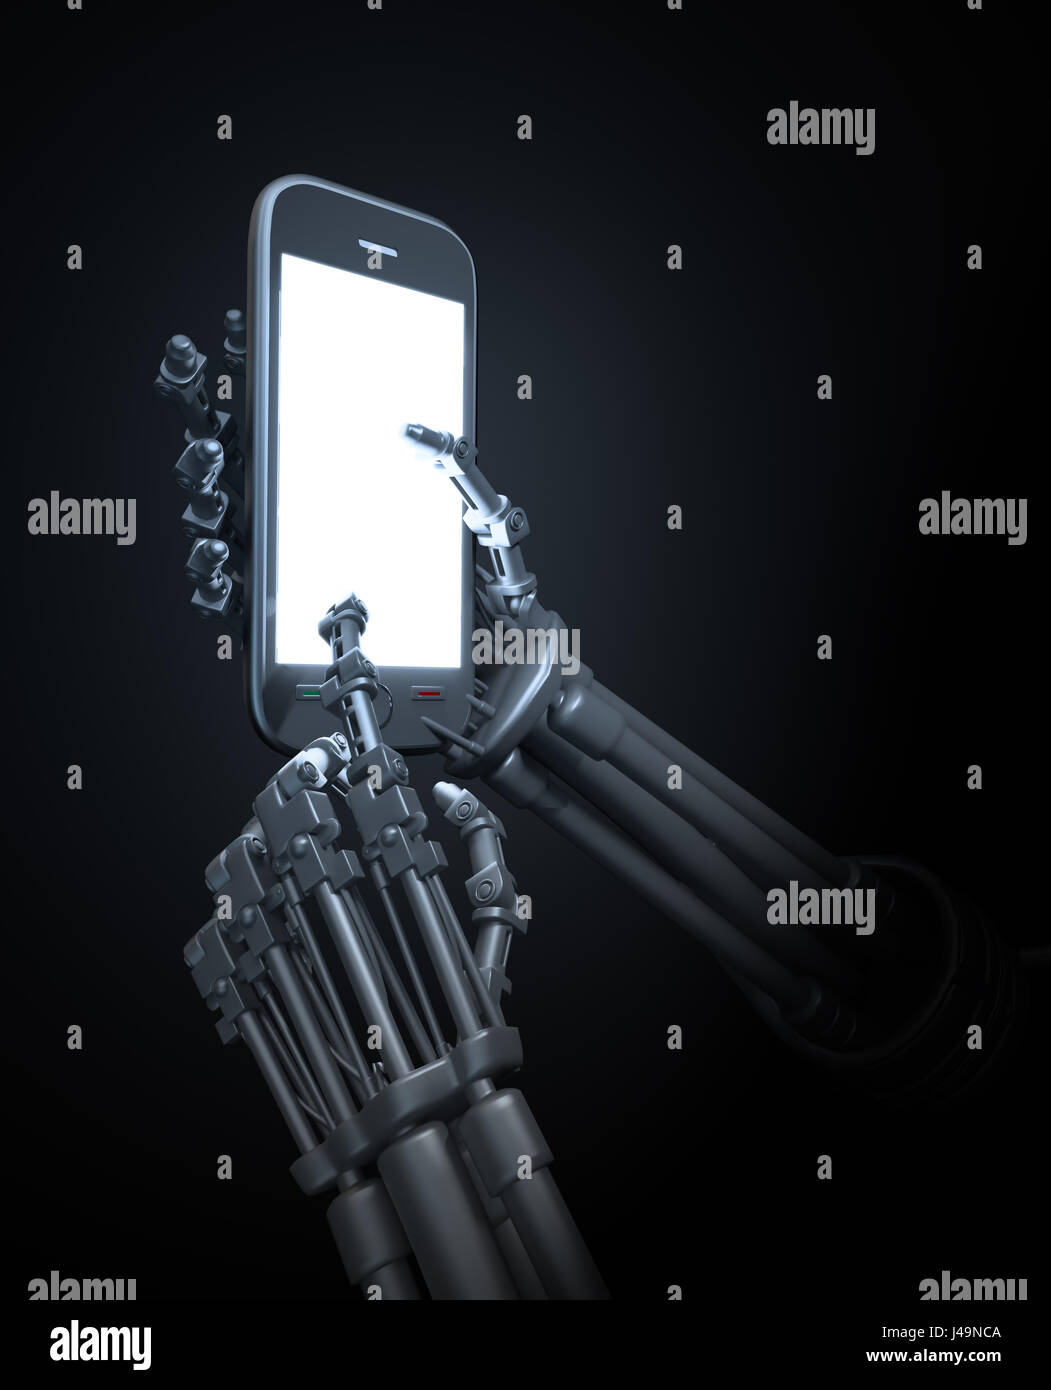 Robot holding a mobile phone - 3d illustration Stock Photo